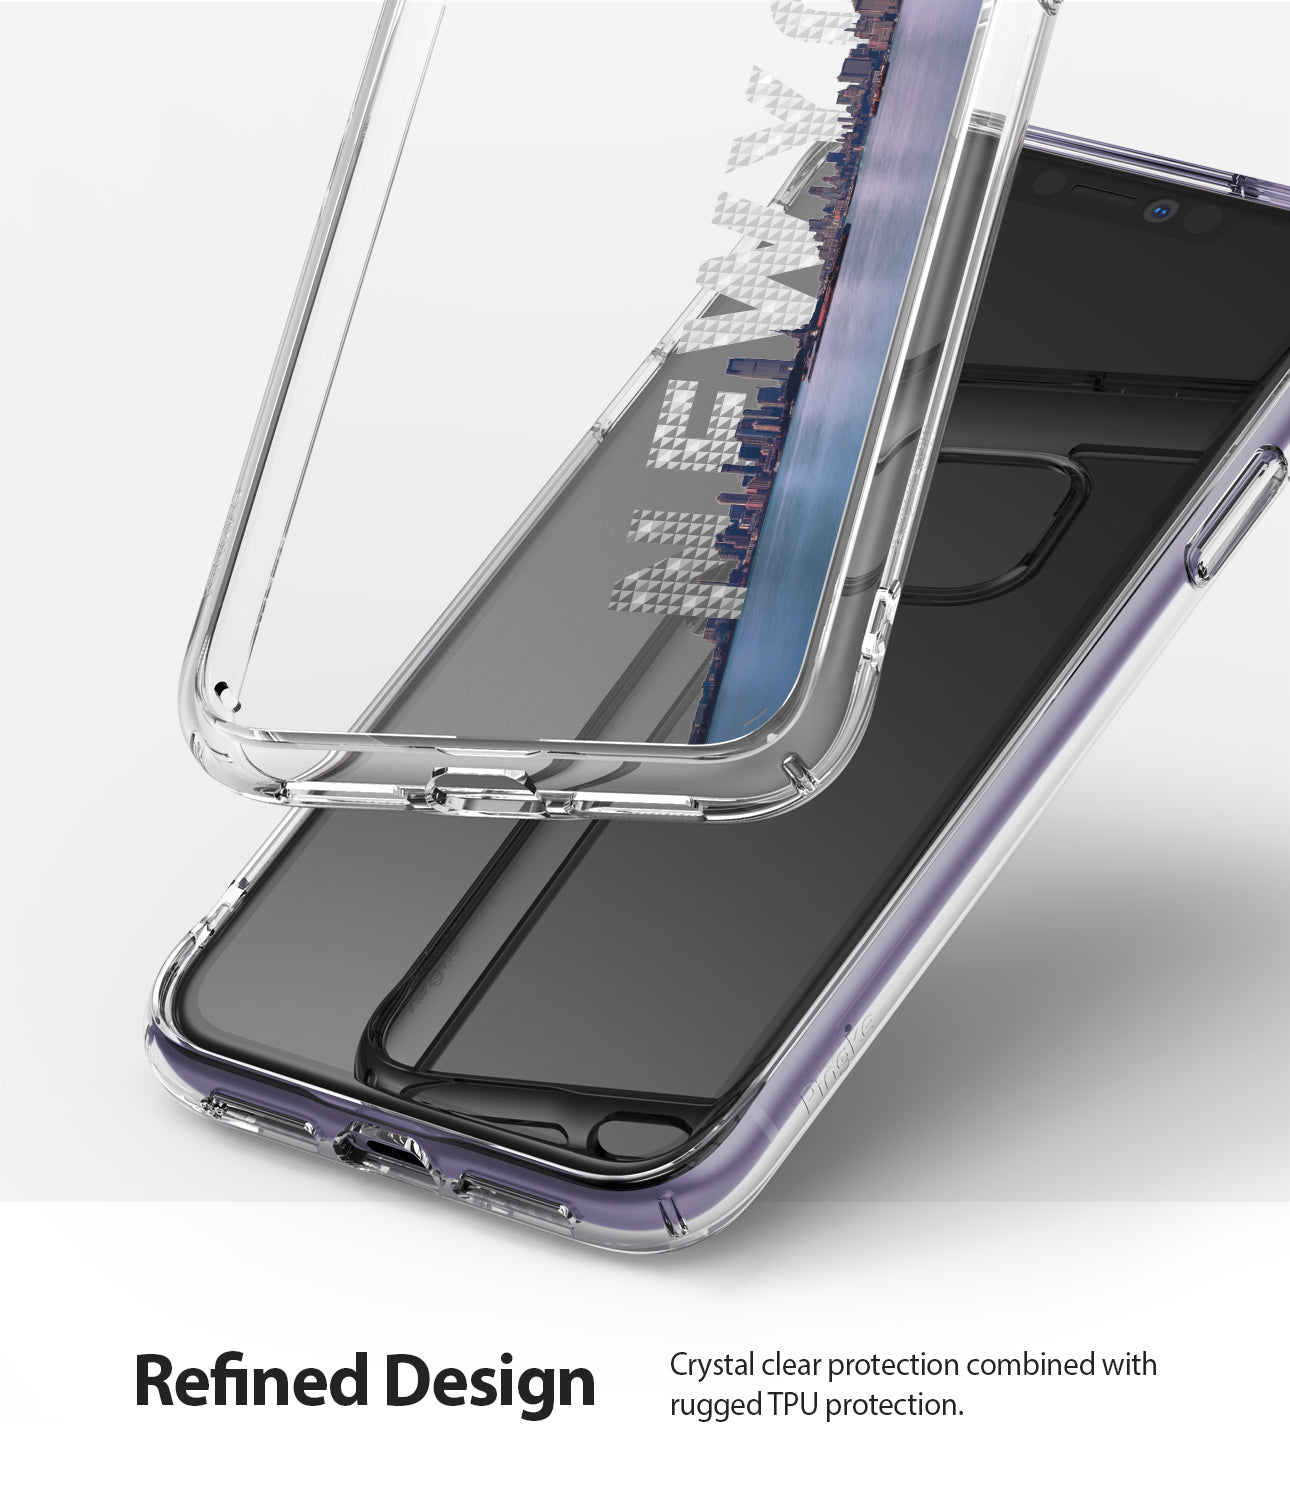 crystal clear protection combined with rugged tpu proteciton